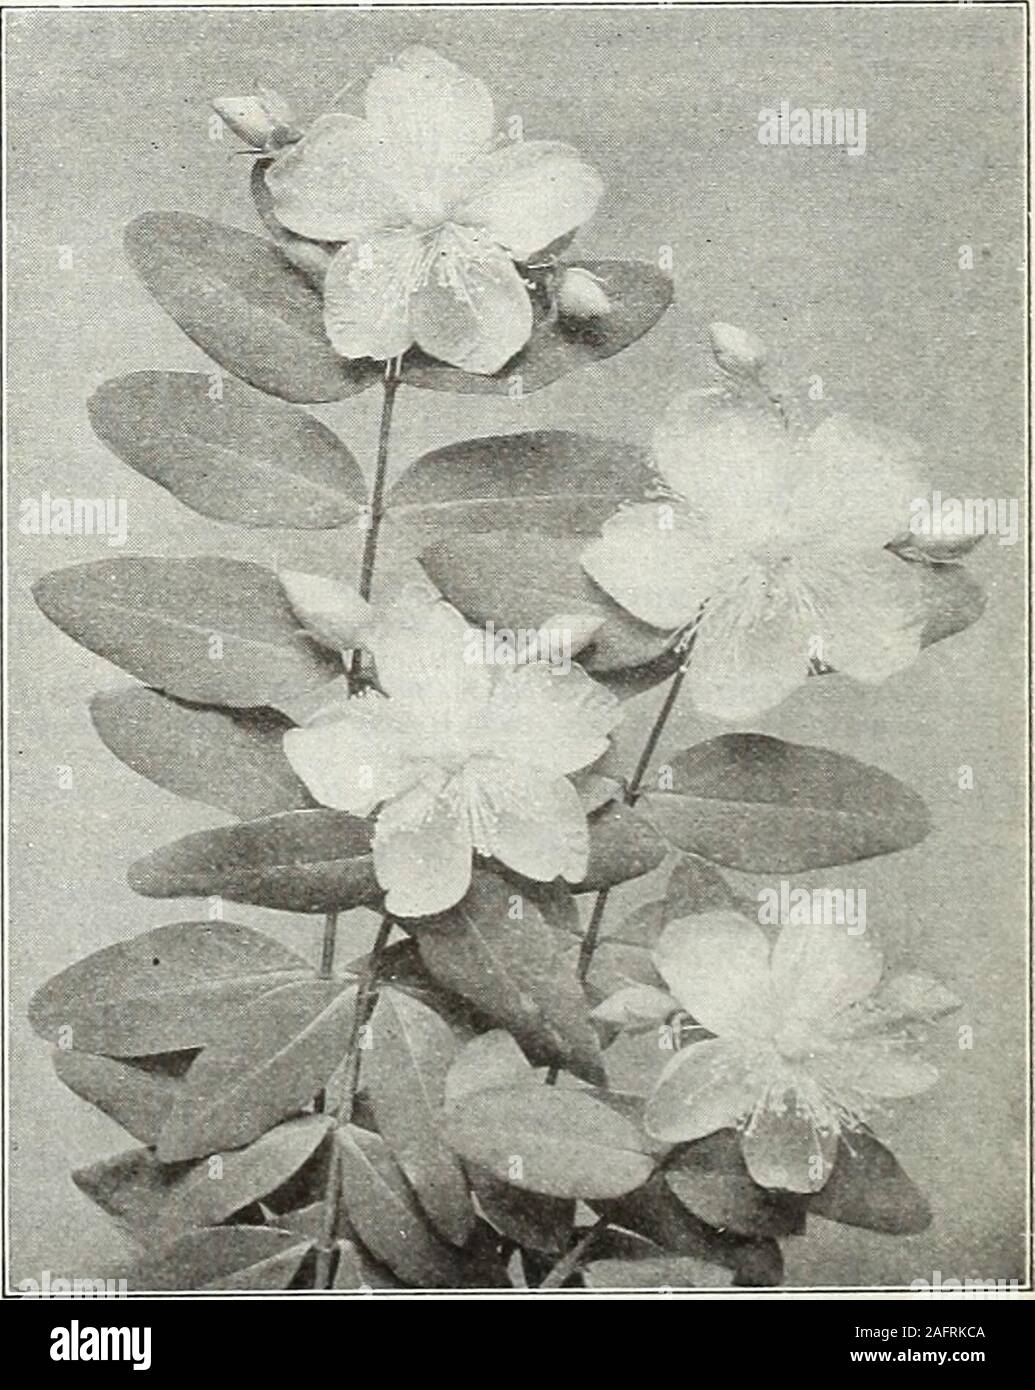 . Farquhar's autumn catalogue : 1921. now white blooms75 cts. each arborescens grandiflora alba. of large size; June to August. HYPERICUM patulum var. Henryi. A new hardy St. Johns Wort, grow-ing 21 to 4 ft., with masses of clear yellow flowers produced in great profu-sion during July and August. The leaves are elliptic-ovate, about IJ in.long, and are retained late into the Fall. A very desirable yellow-floweredshrub. 75 cts. each 7. 50 ILEX verticillata. during Winter. (Winterberry.)75 cts. each Beautiful orange-red berries which remain Oil 5.00 LIGUSTRUM ibota. (Chinese Privet.) A very hard Stock Photo